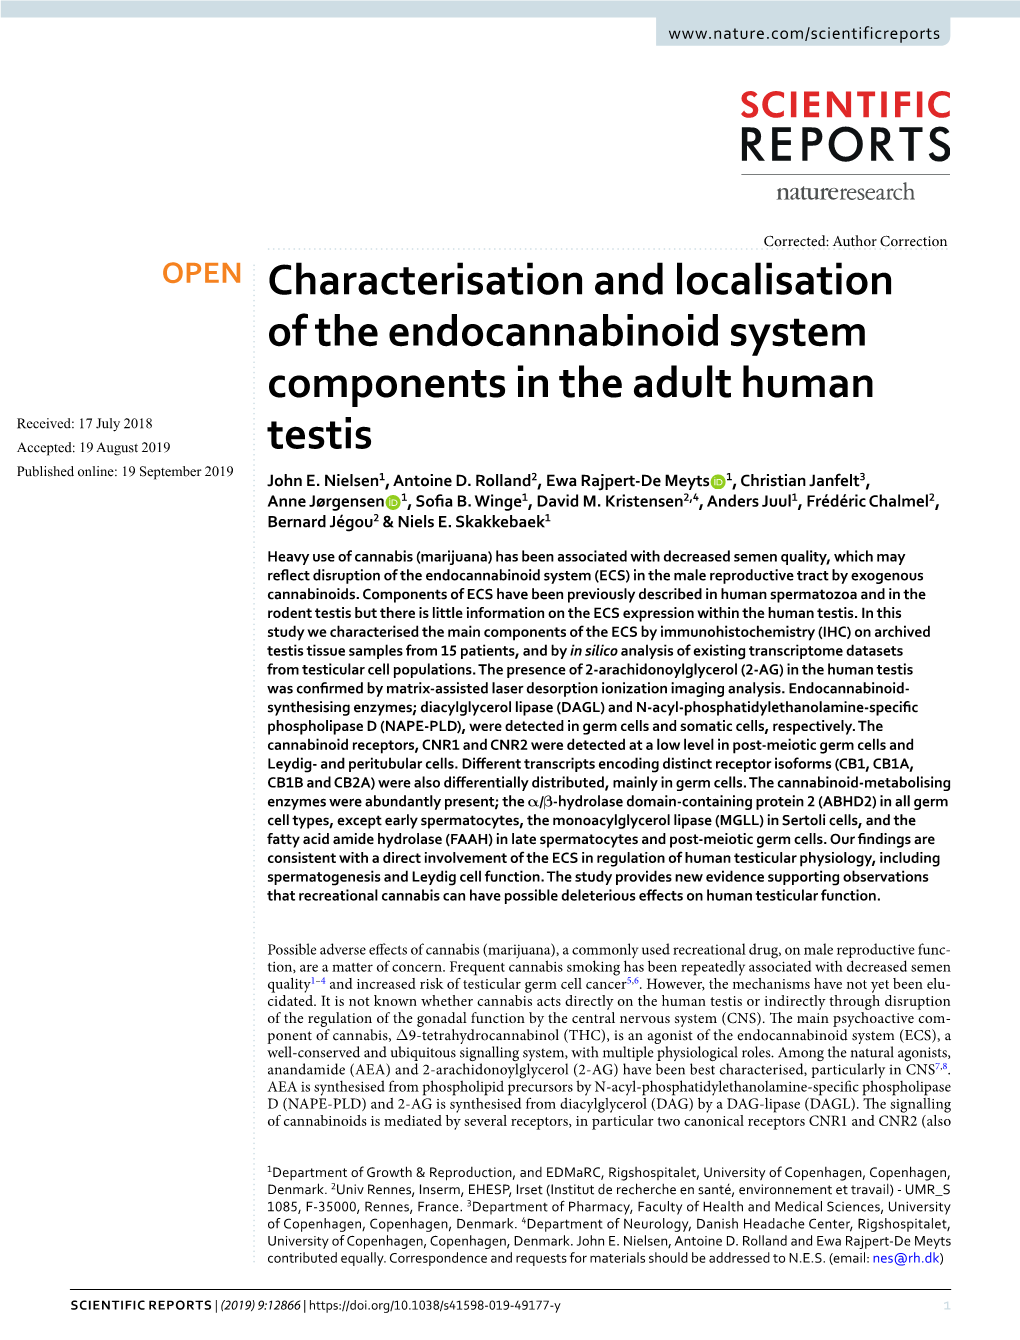 Characterisation and Localisation of the Endocannabinoid System